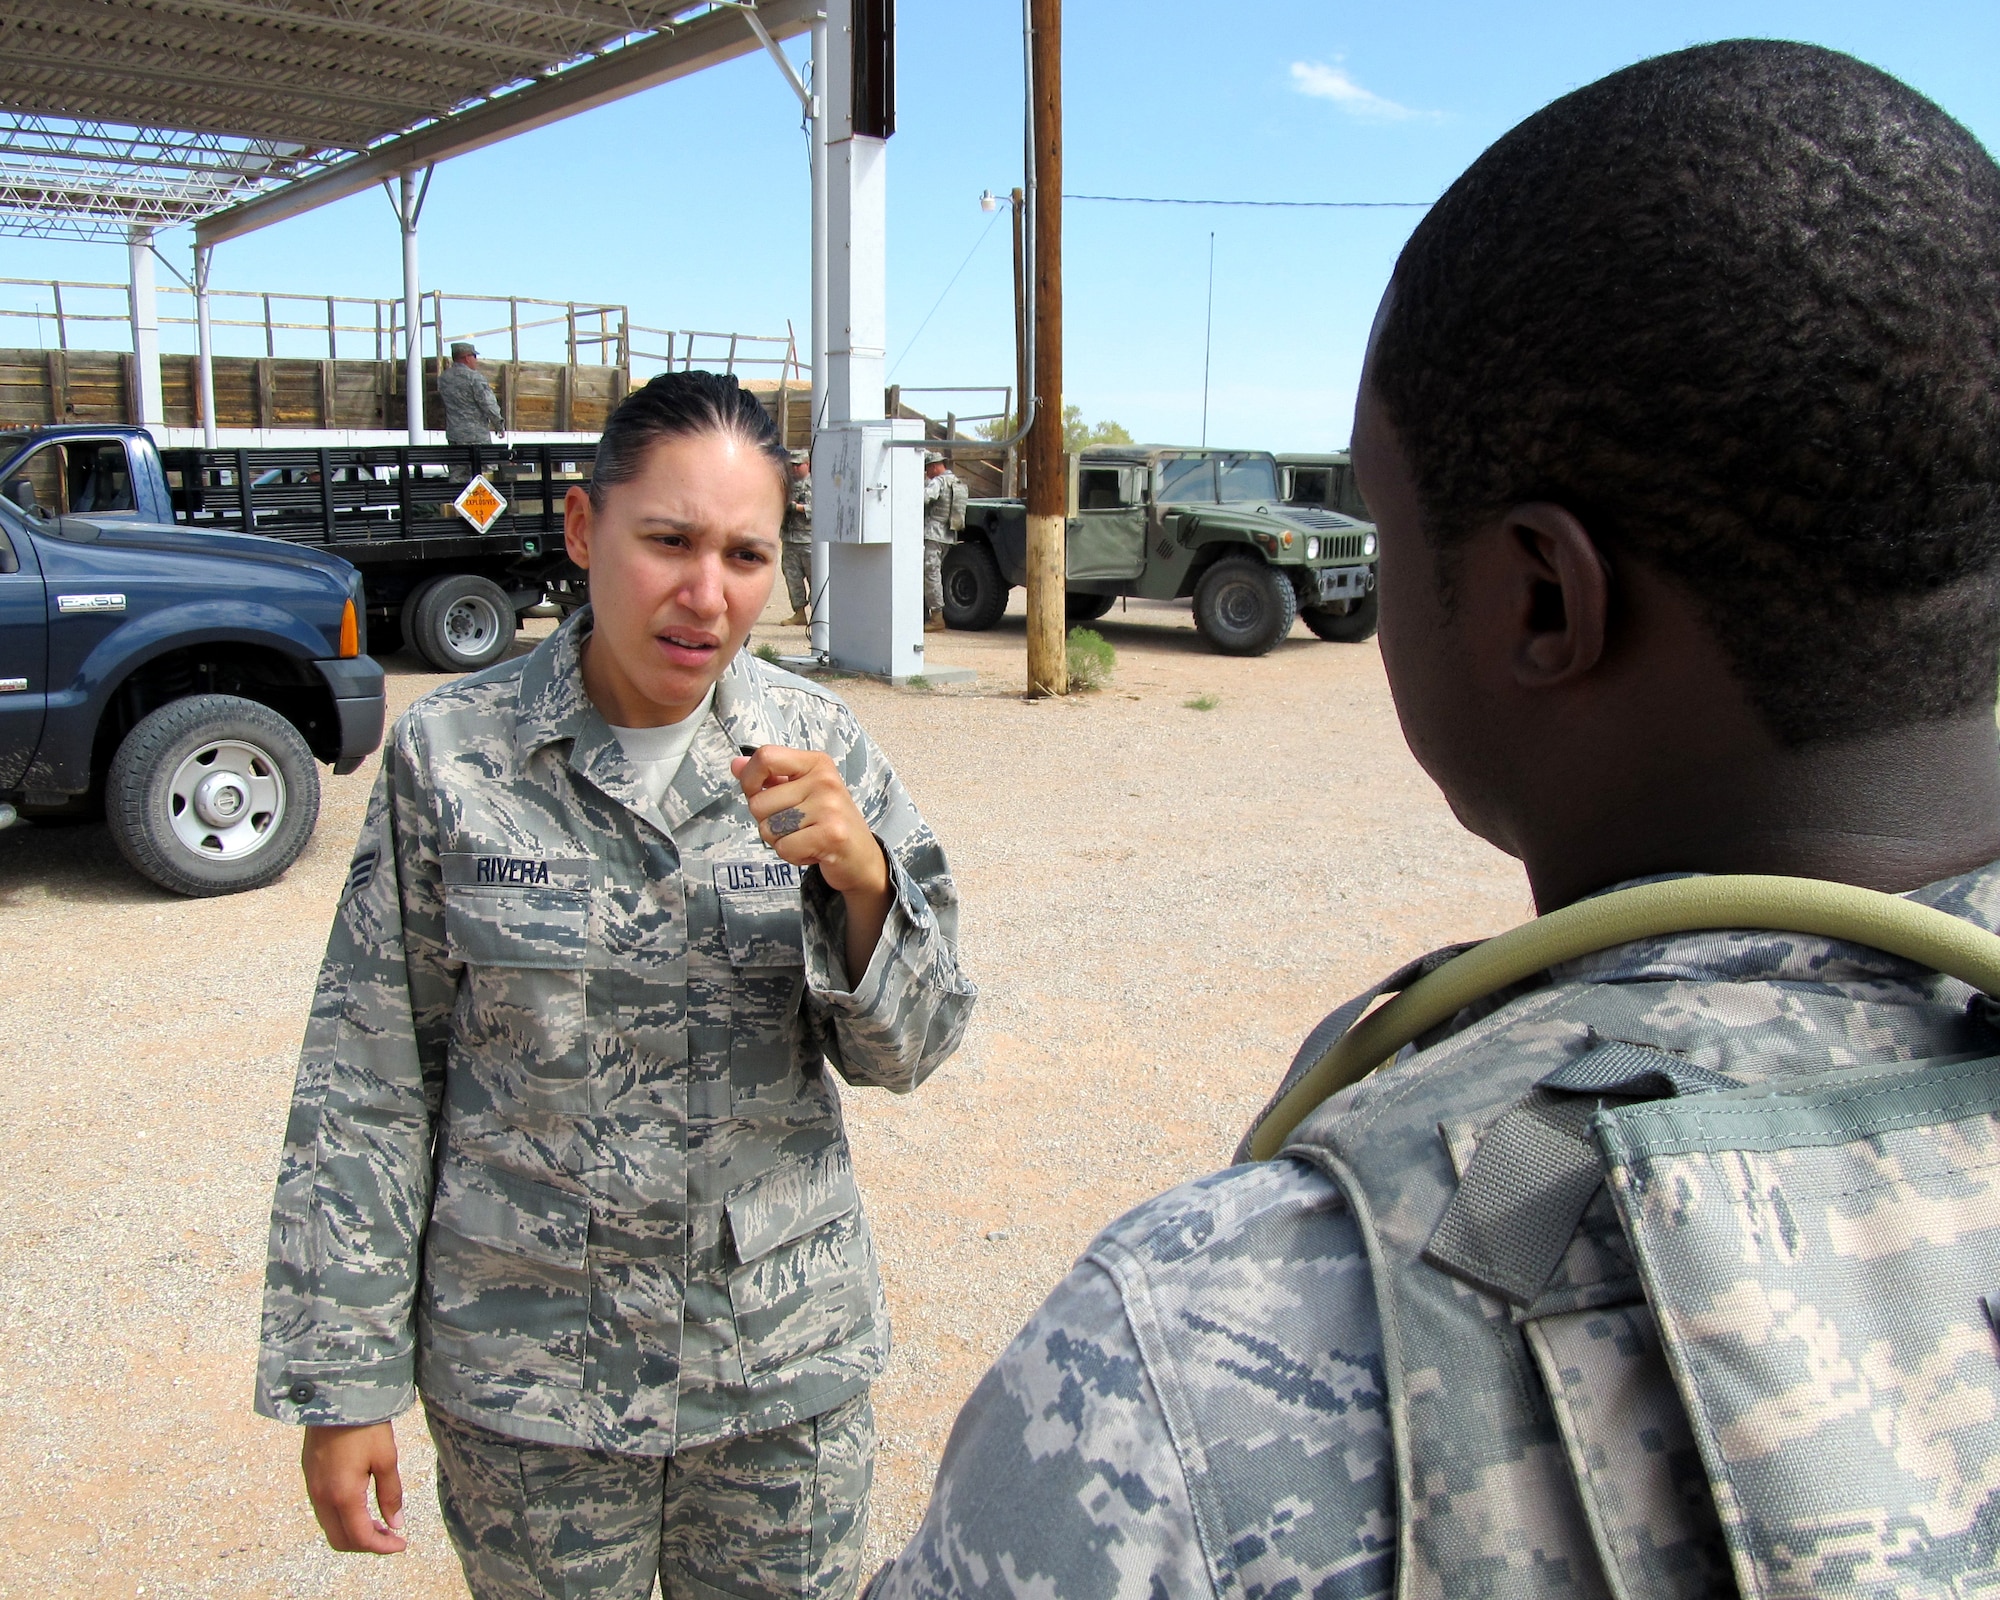 Senior Airman (SrA) Luz Rivera, an aerospace medical technician with the Texas Air National Guard?s 149th Fighter Wing at Lackland Air Force Base, Texas, visits with a student before training operations begin at the Texas Air National Guard?s 204th Security Forces Squadron at Fort Bliss, Texas; Sept. 13, 2011. (Air National Guard photo by Staff Sgt. Phil Fountain/Released)